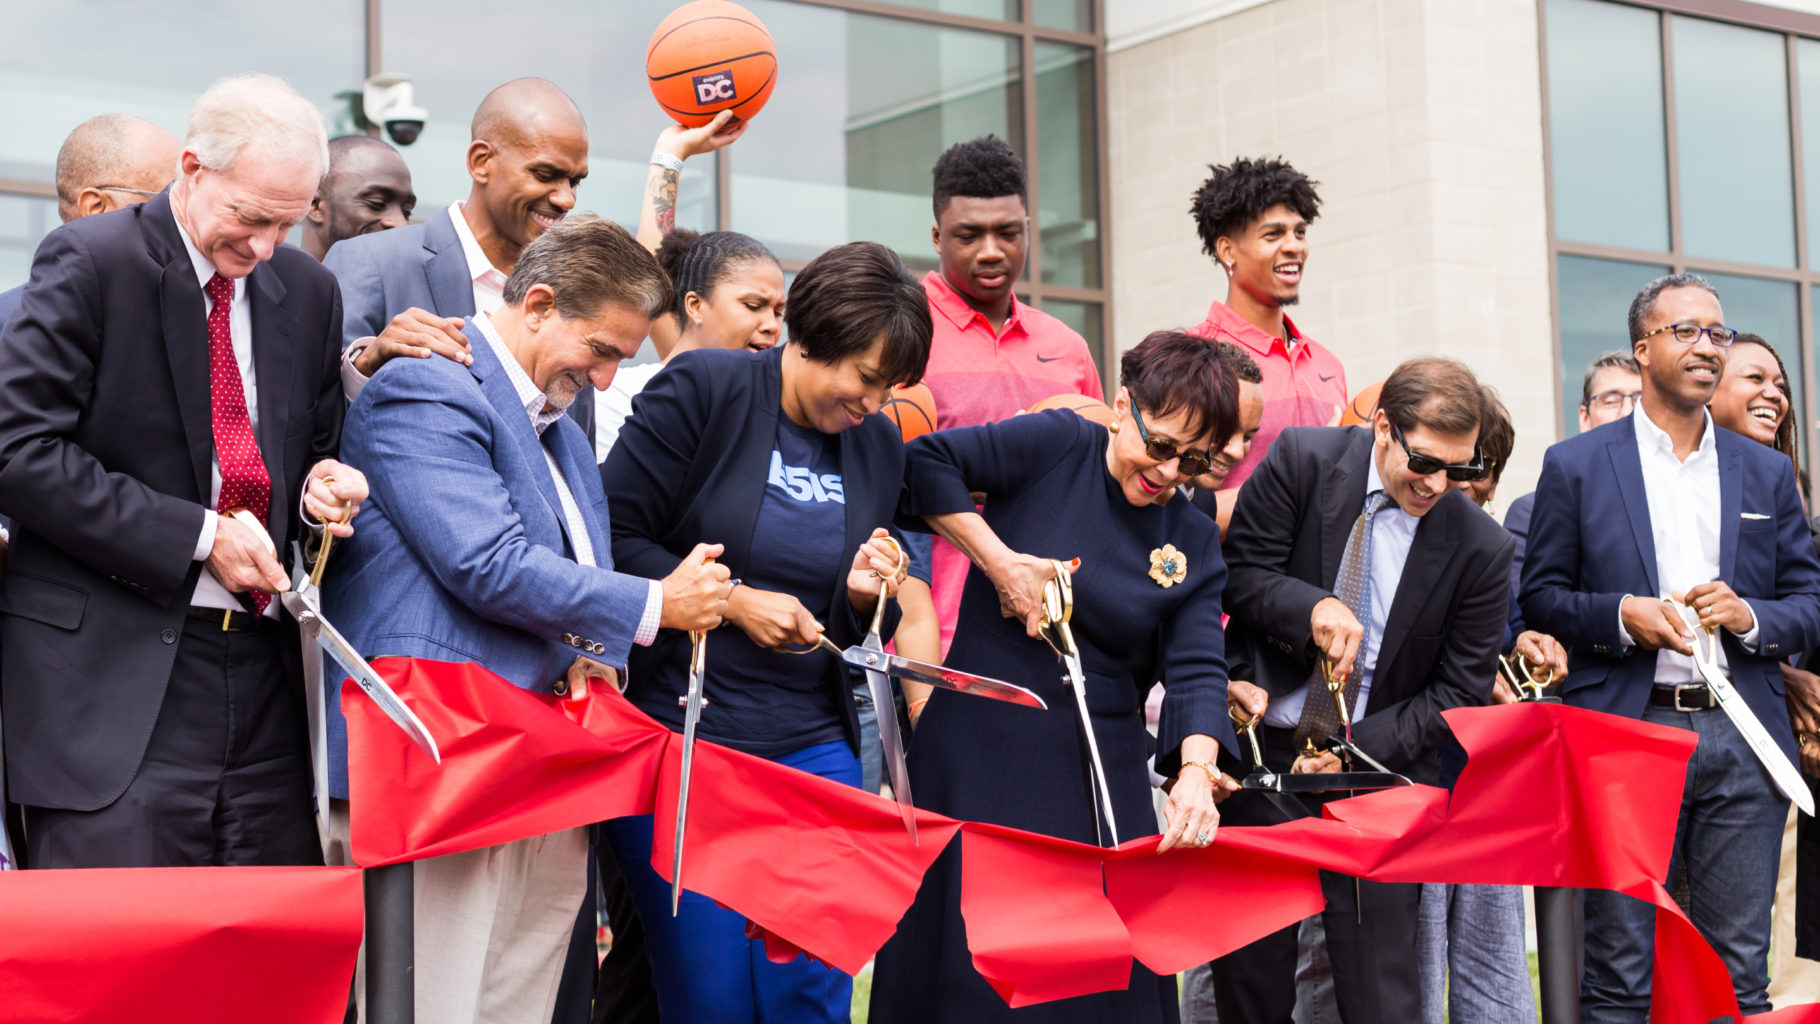 DC Celebrates Entertainment and Sports Arena Grand Opening